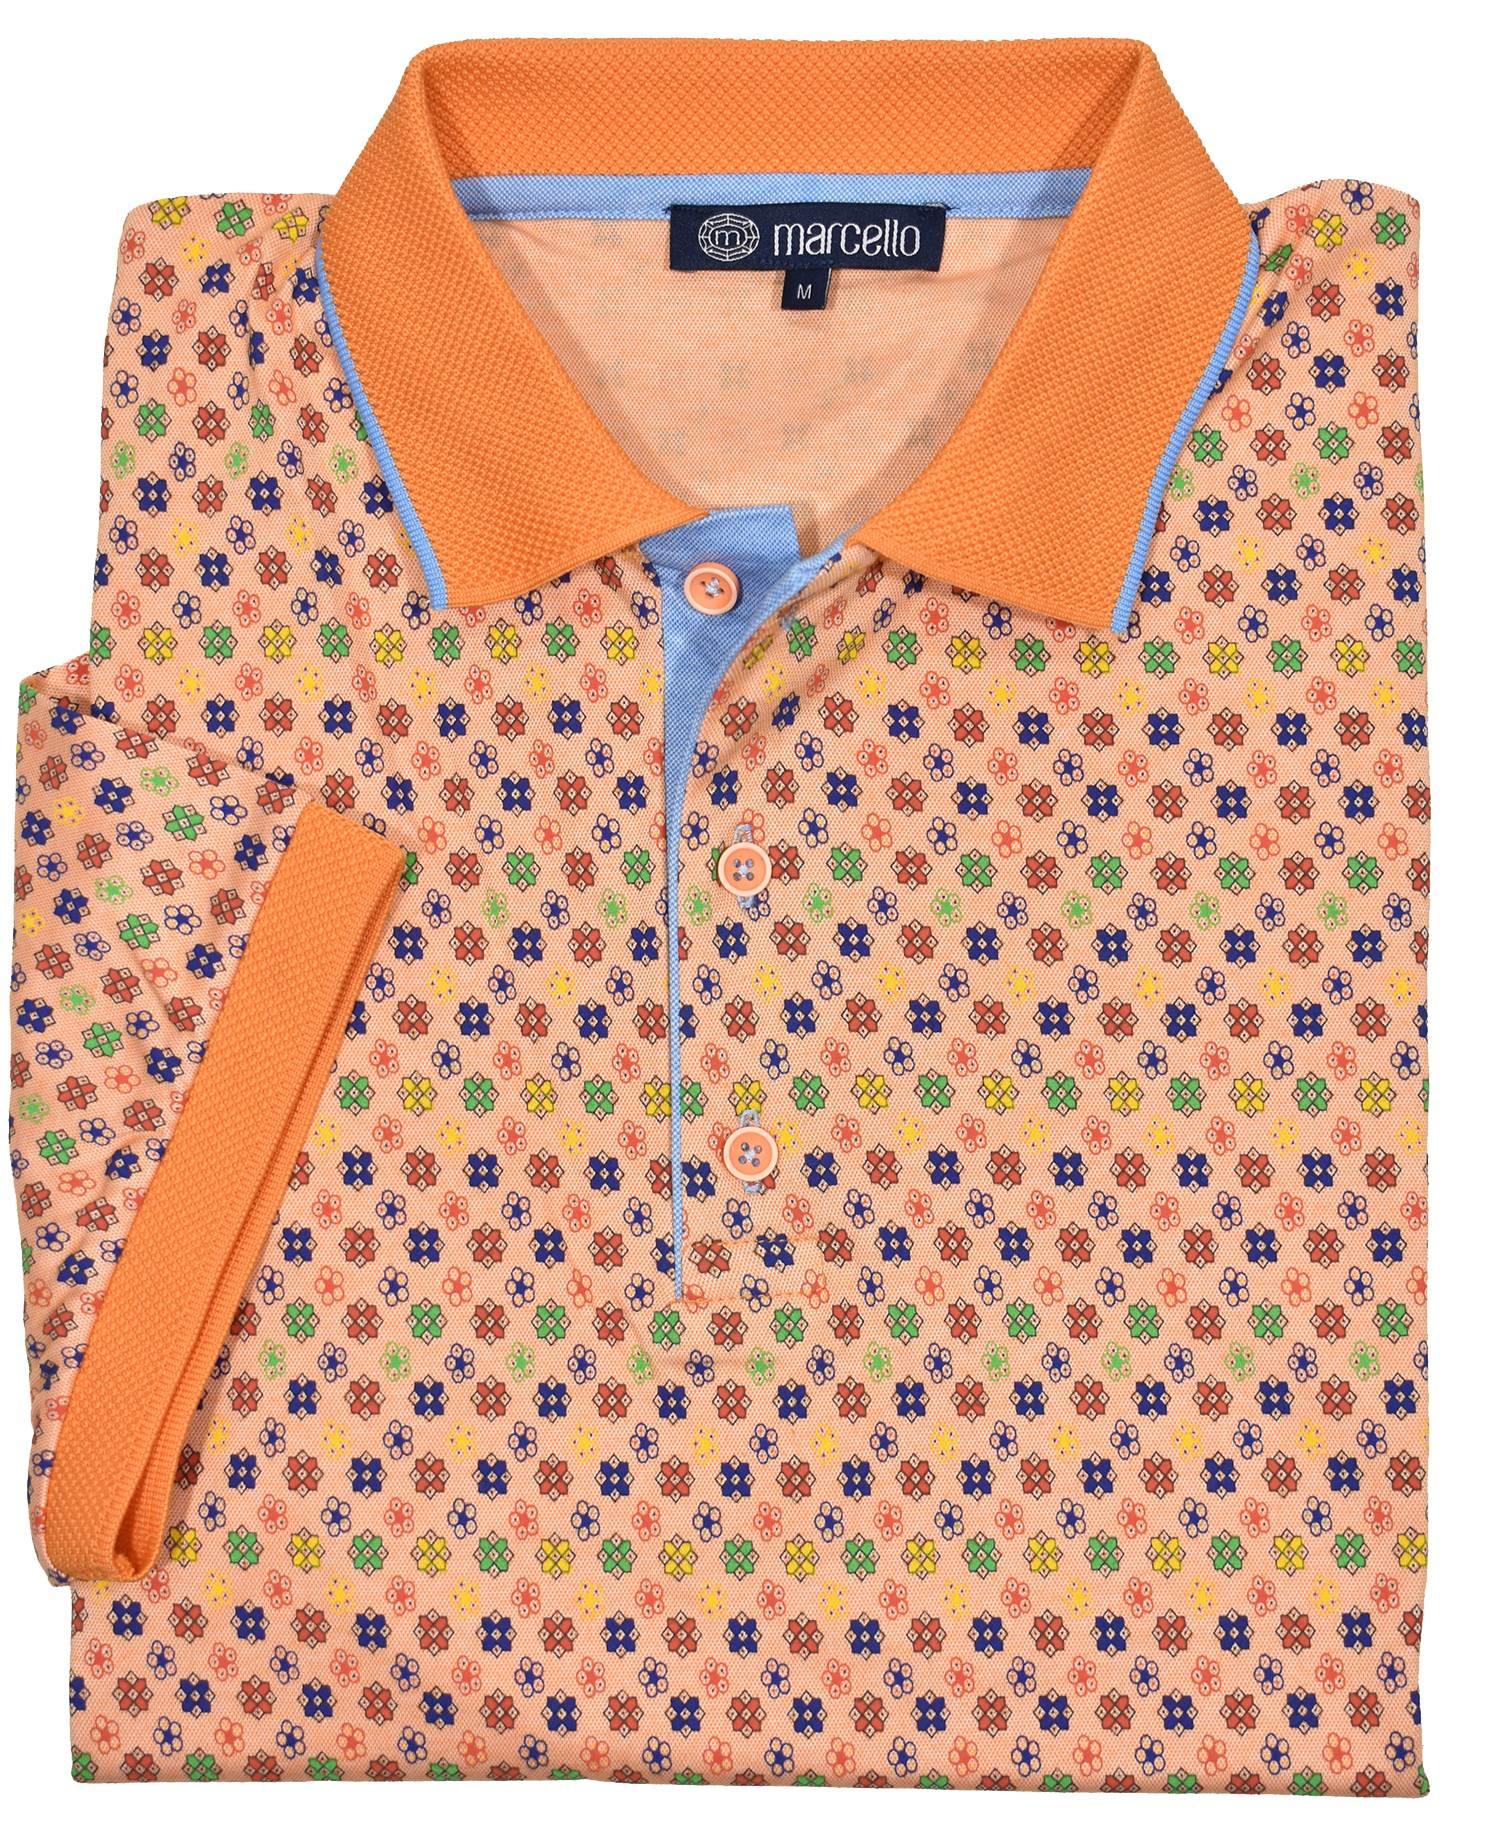 Ultra soft mercerized cotton is the ultimate in comfort and style.  Unique fashion in a colorful shirt with a colored medallion.  Ultimate cotton fabric. Updated traditional printed pattern. Trend collar with contrast detailing. Custom buttons. Modern fit.